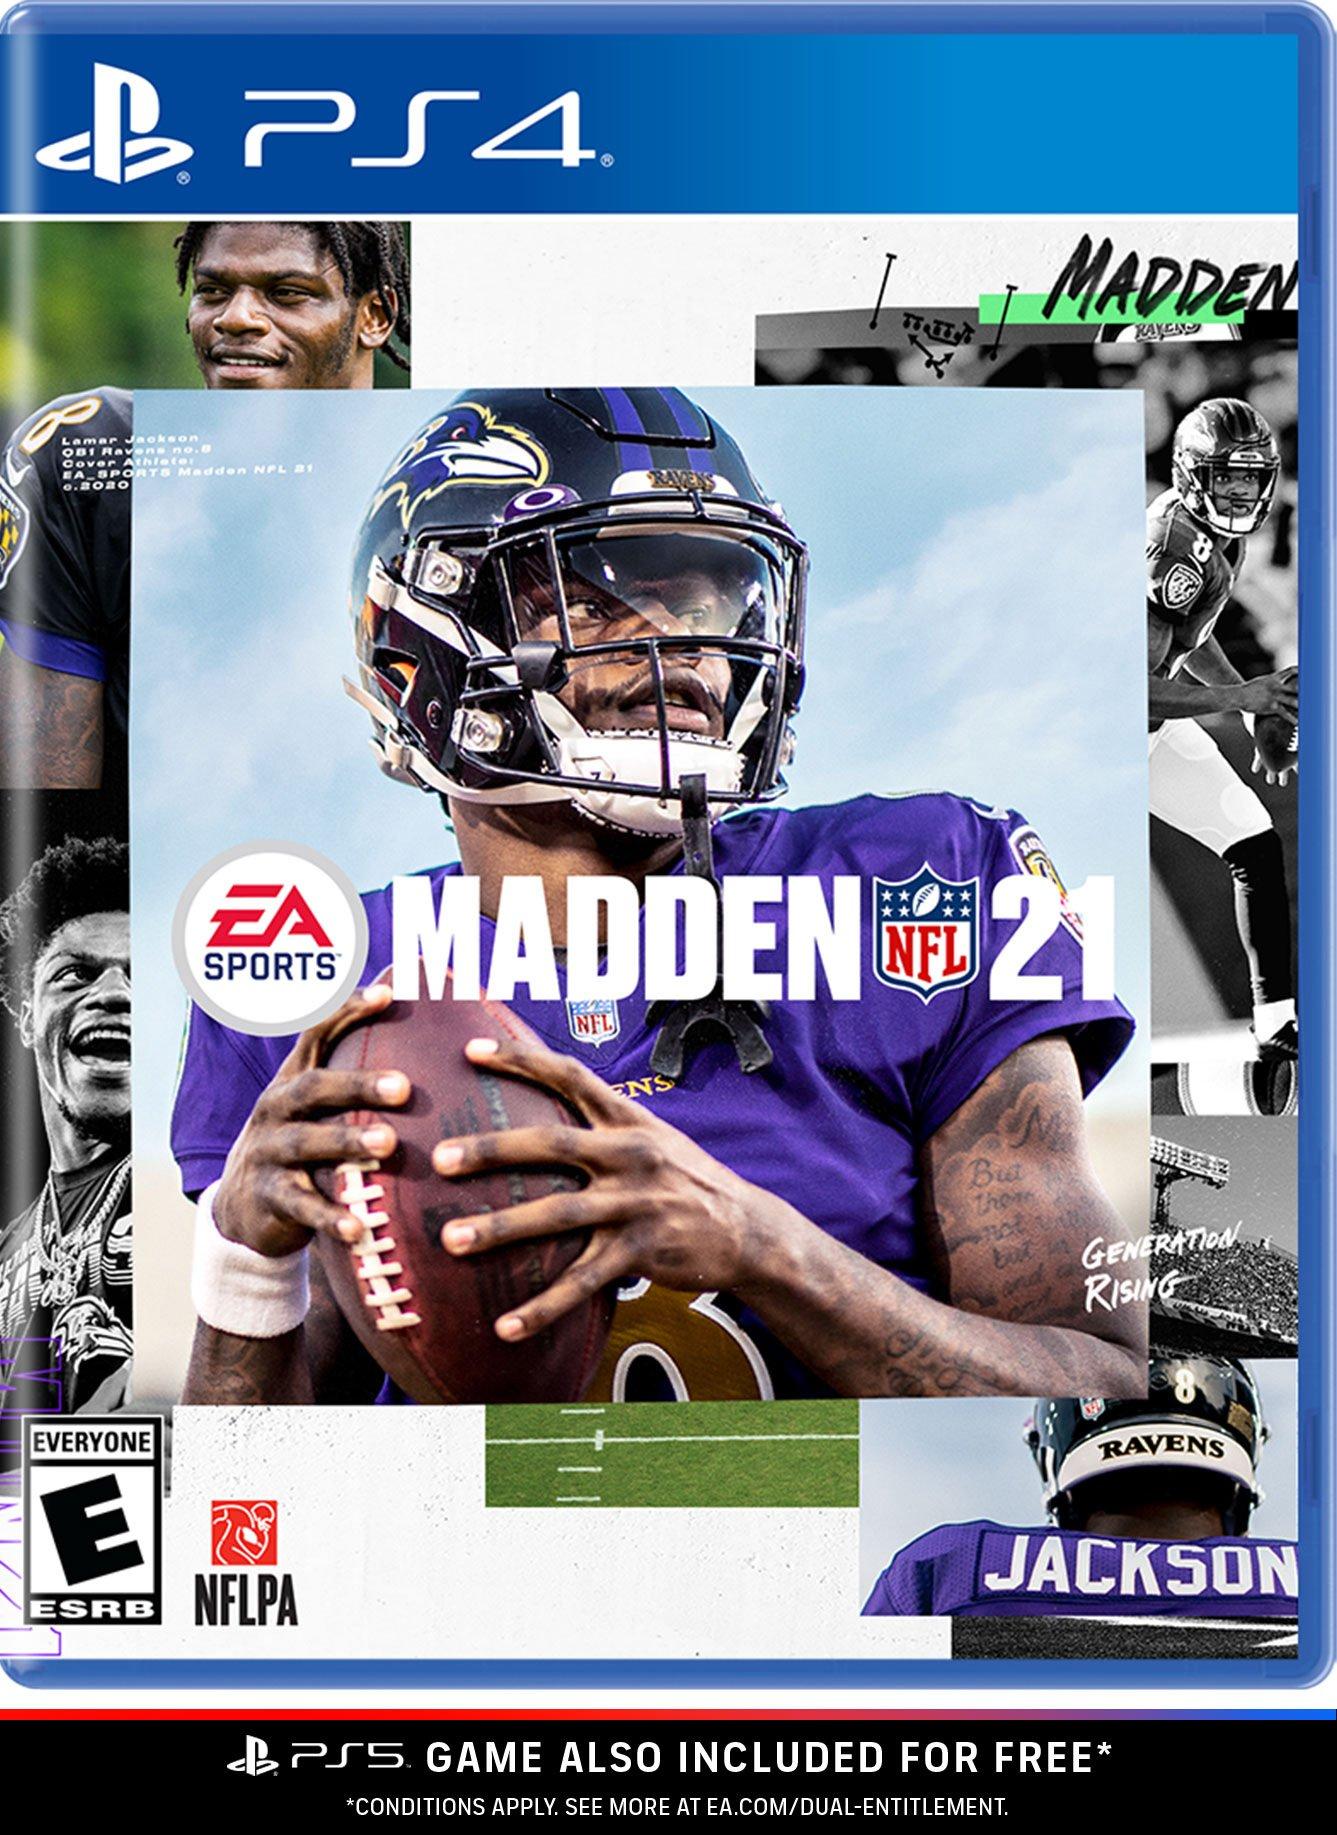 does nintendo switch have madden